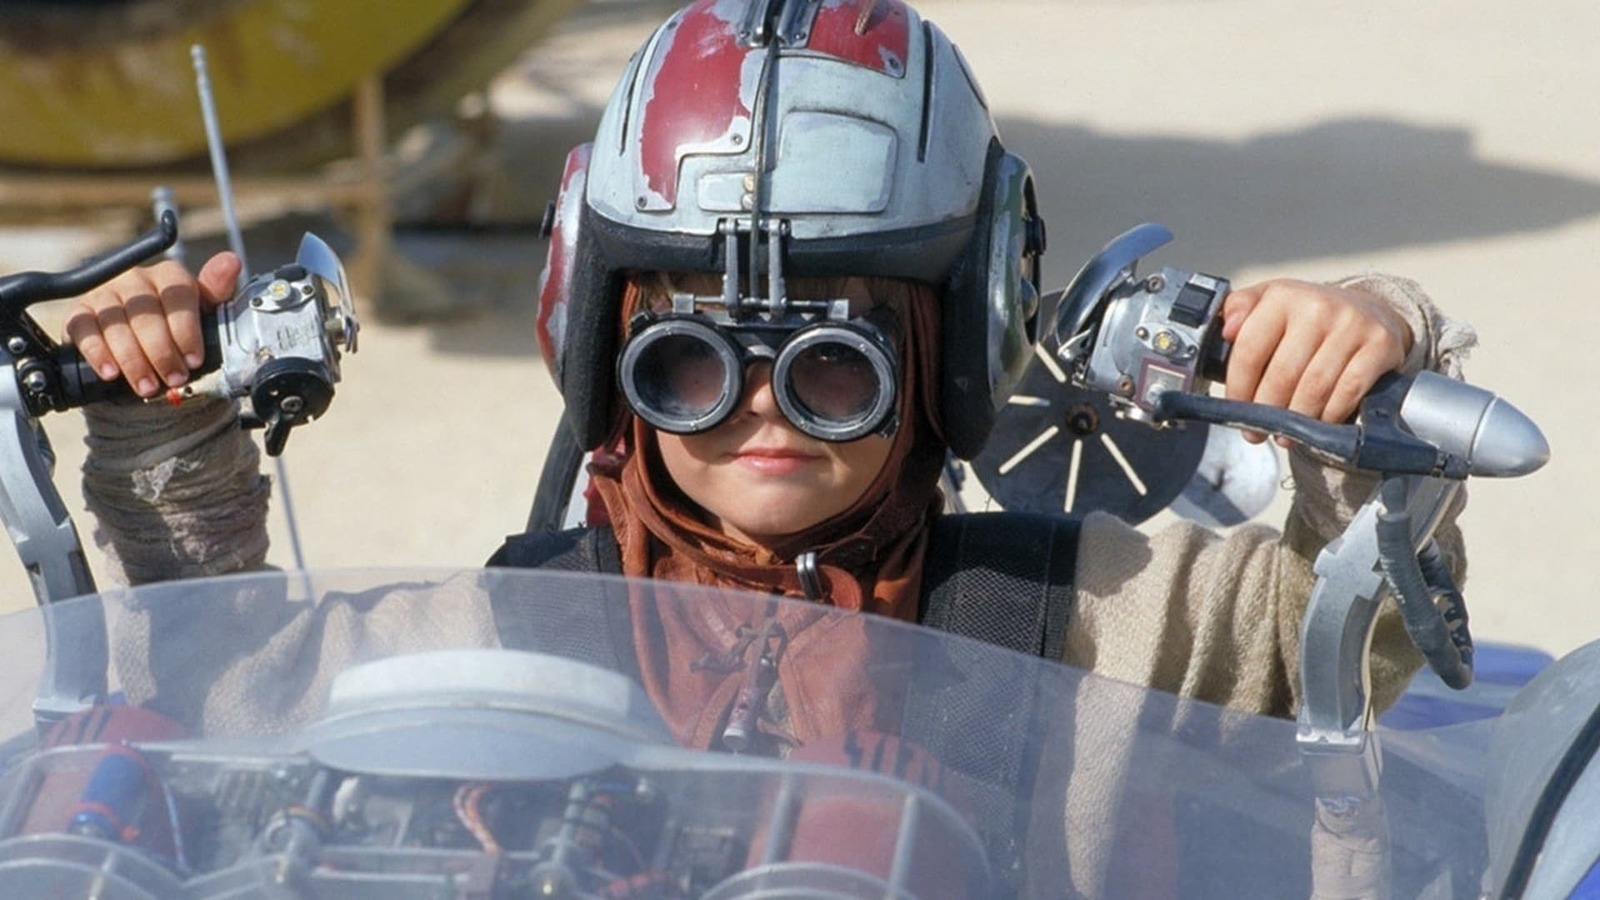 Creating The Podracing Scene For Star Wars: The Phantom Menace Was A Long,  Collaborative Process